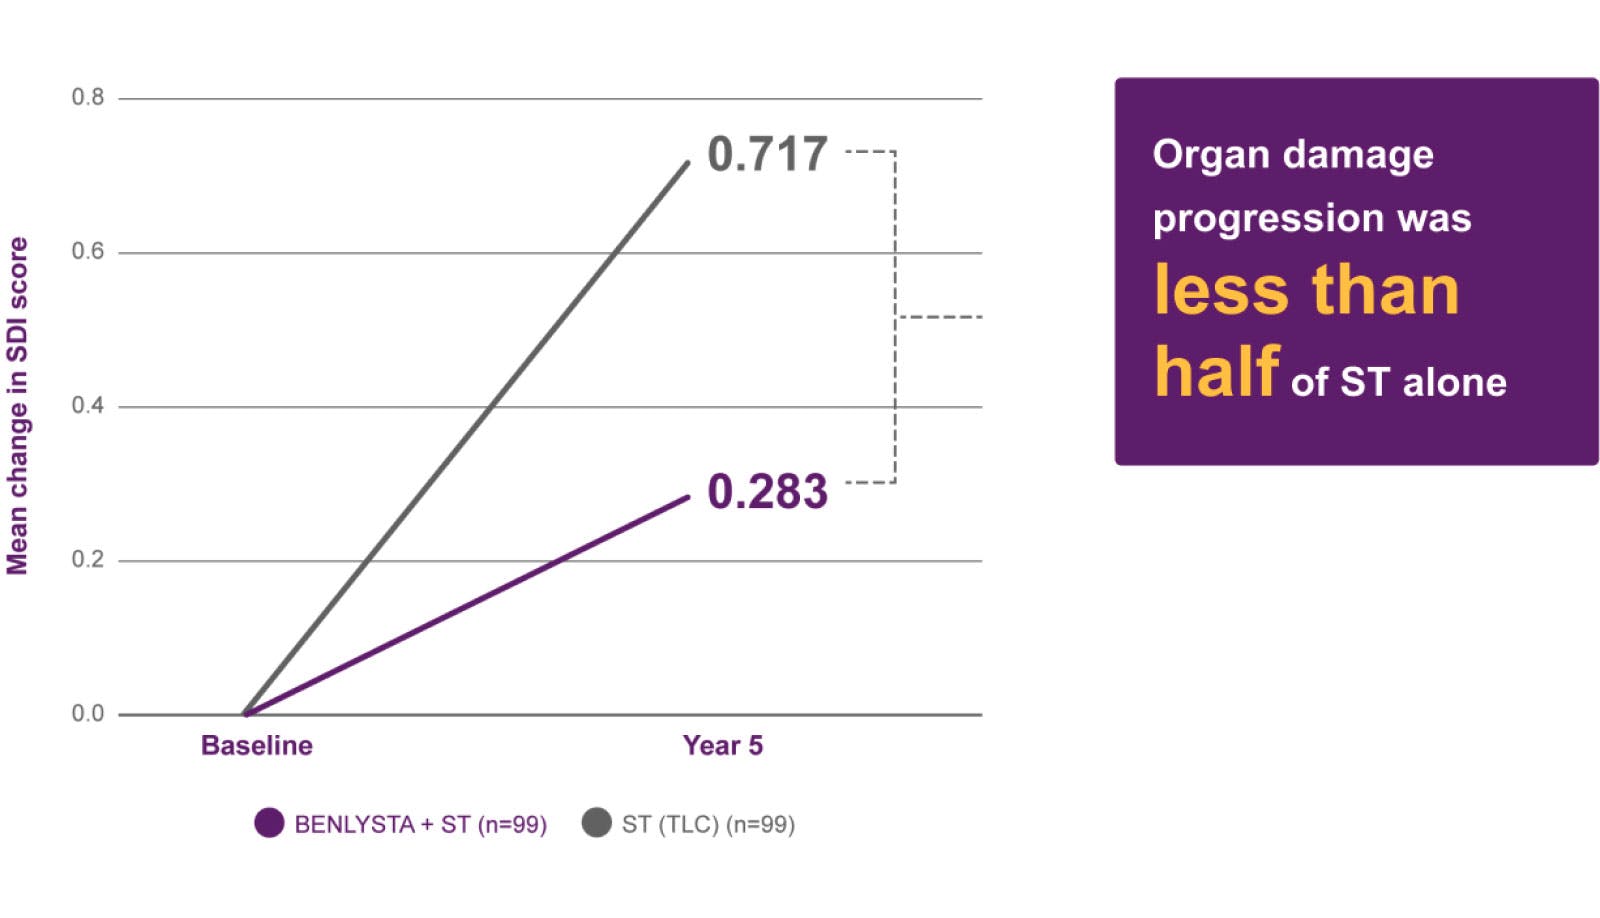 Mean change in organ damage (SDI) from baseline to Year 5 chart